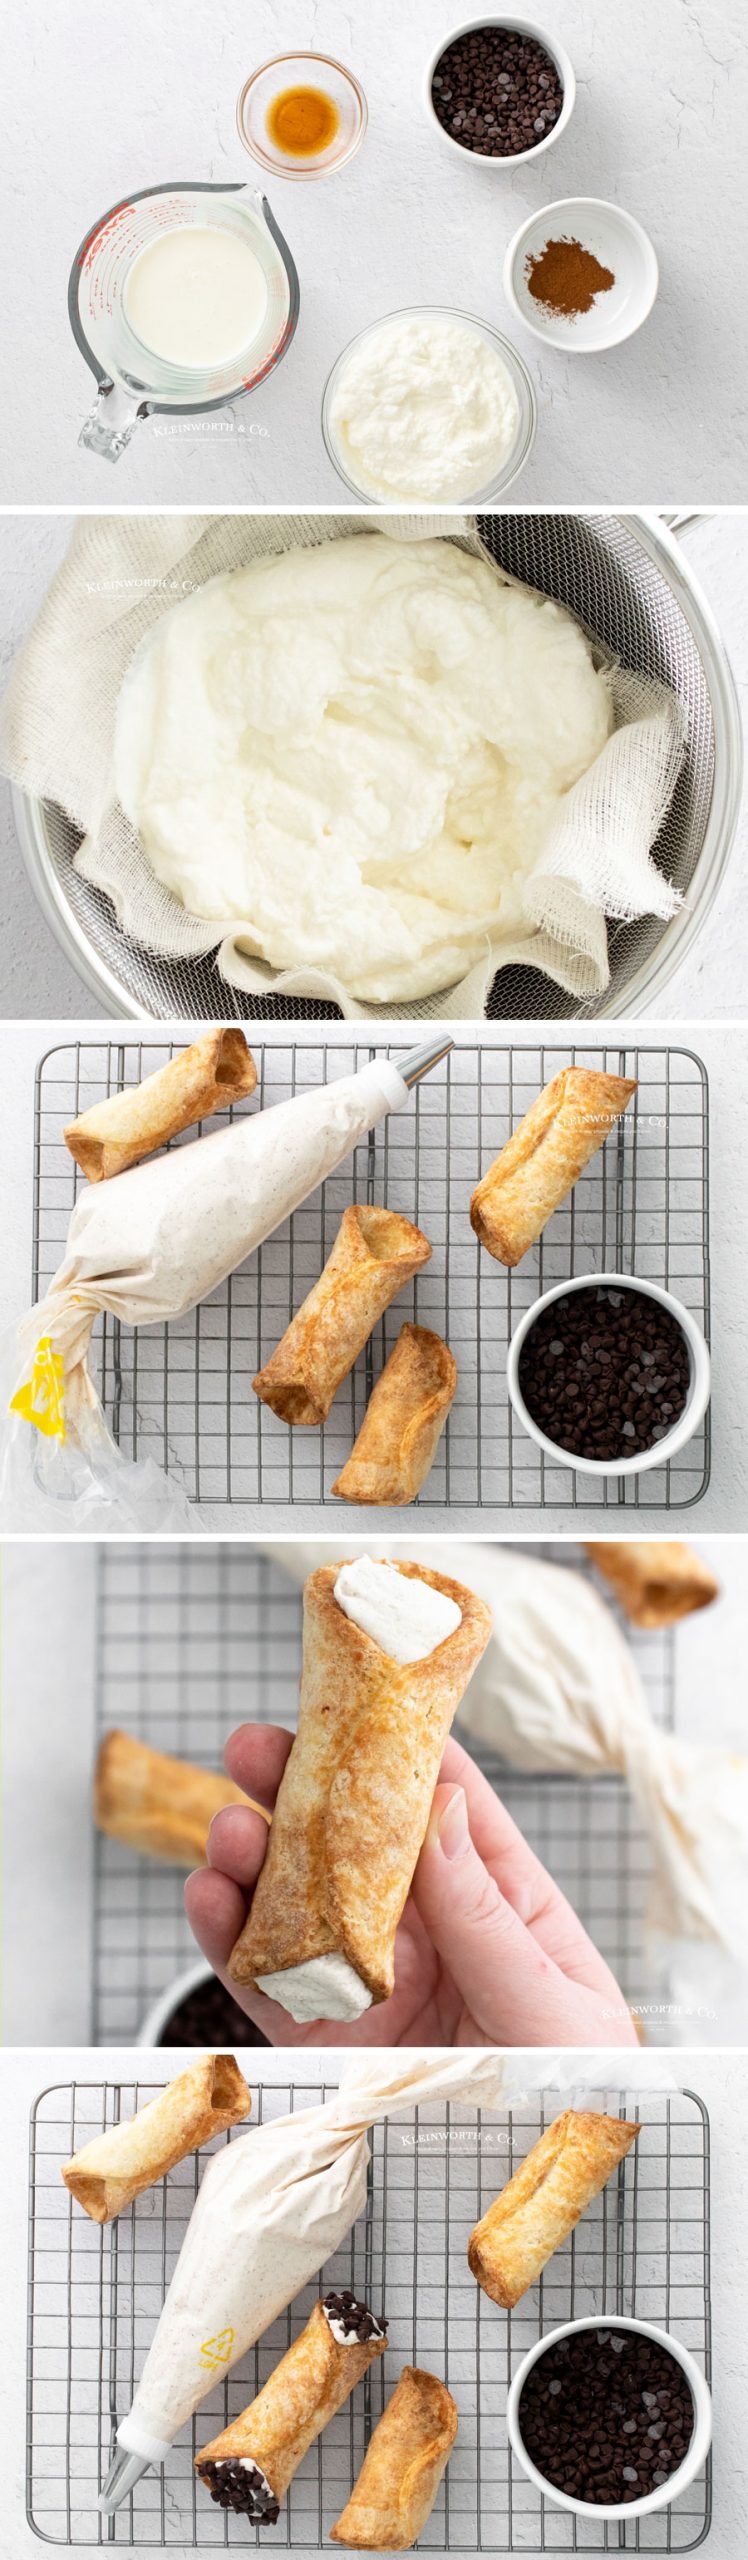 how to make Air Fryer Cannoli - steps 6-10